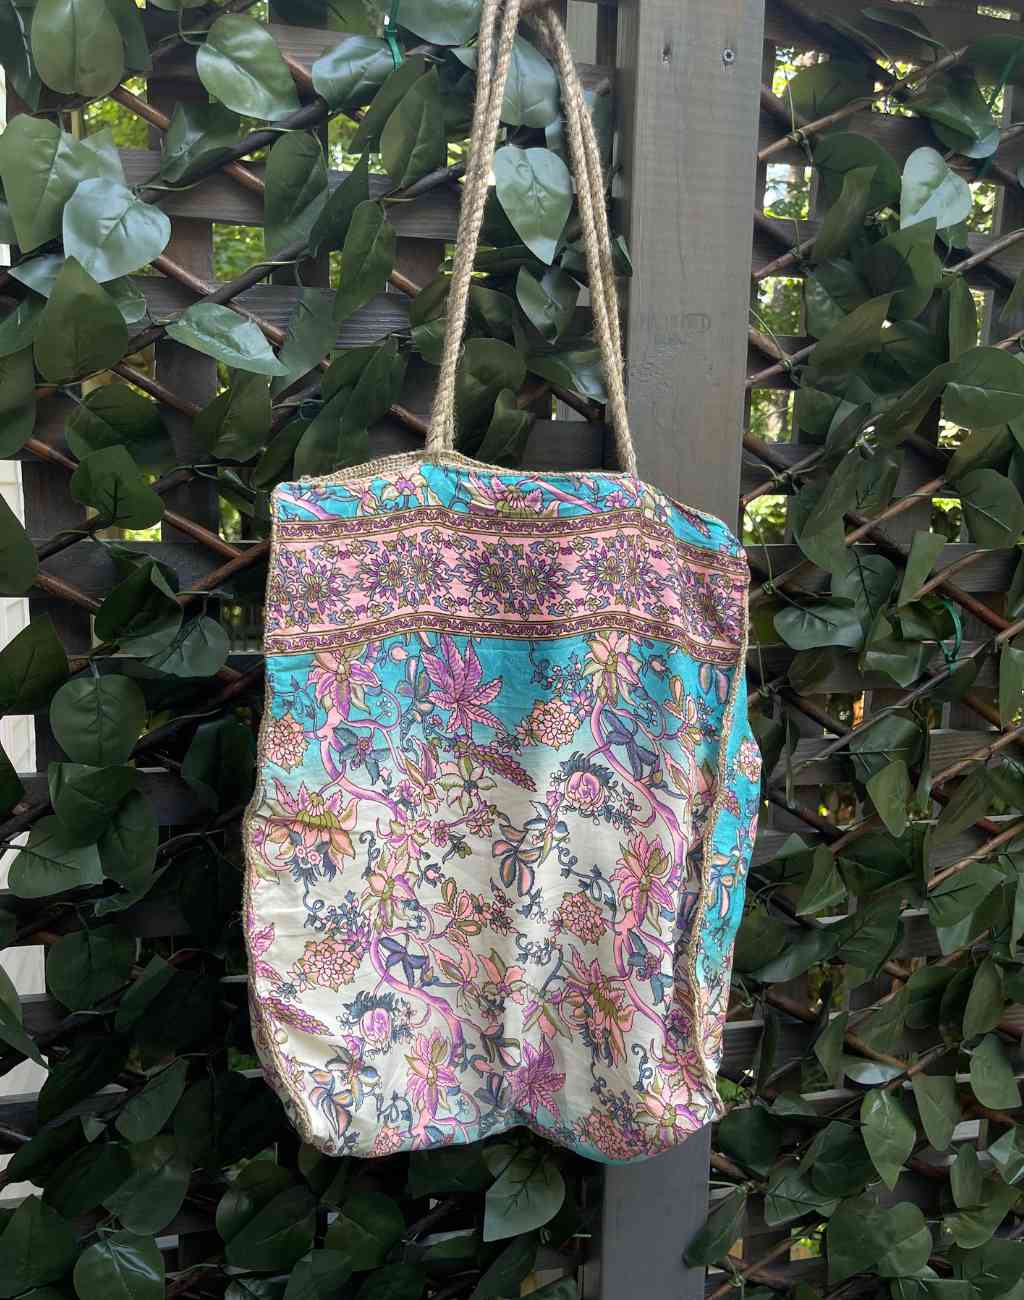 Vintage Silk Covered Jute Tote Bag in Cream, Turquoise, and Pink